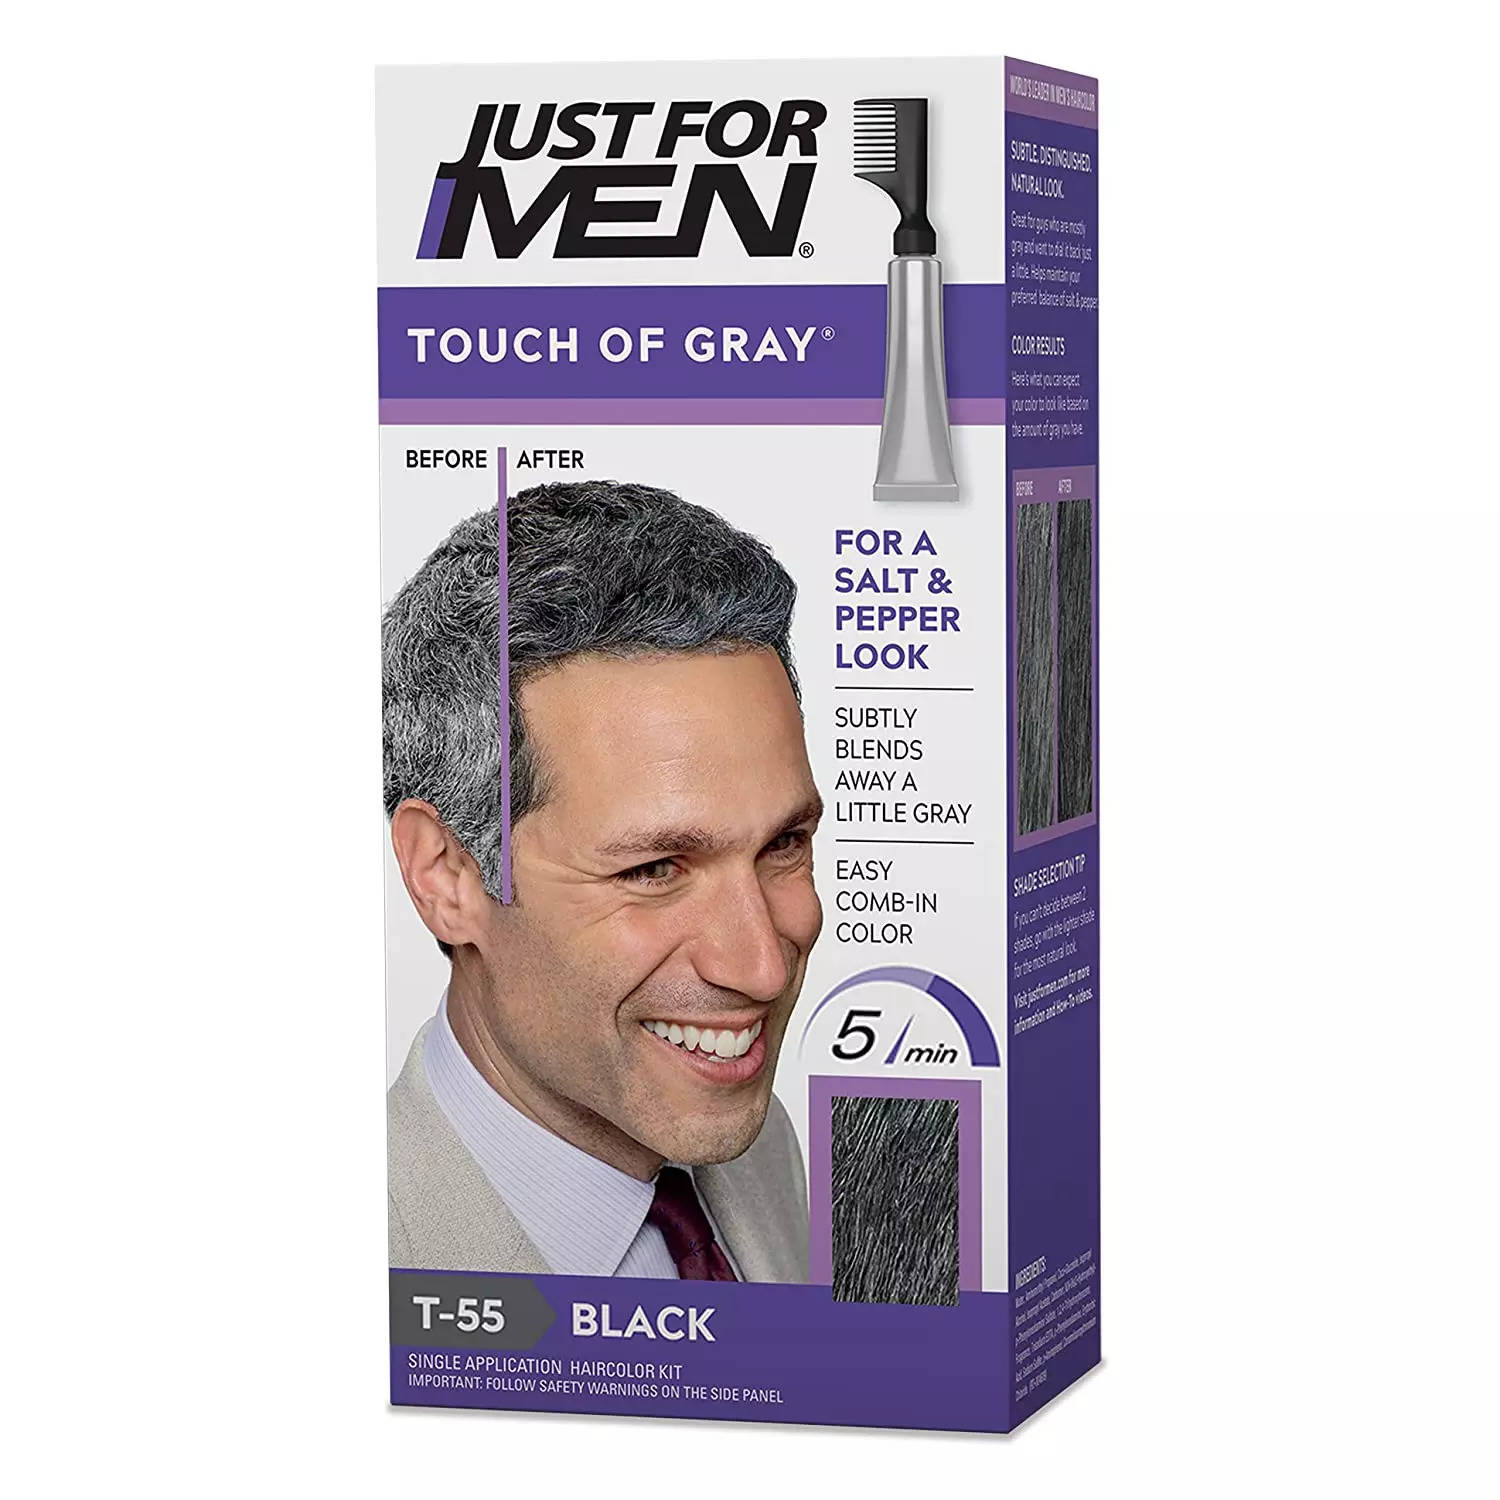 Articles of Style  The Best Colors for Men with Gray Hair